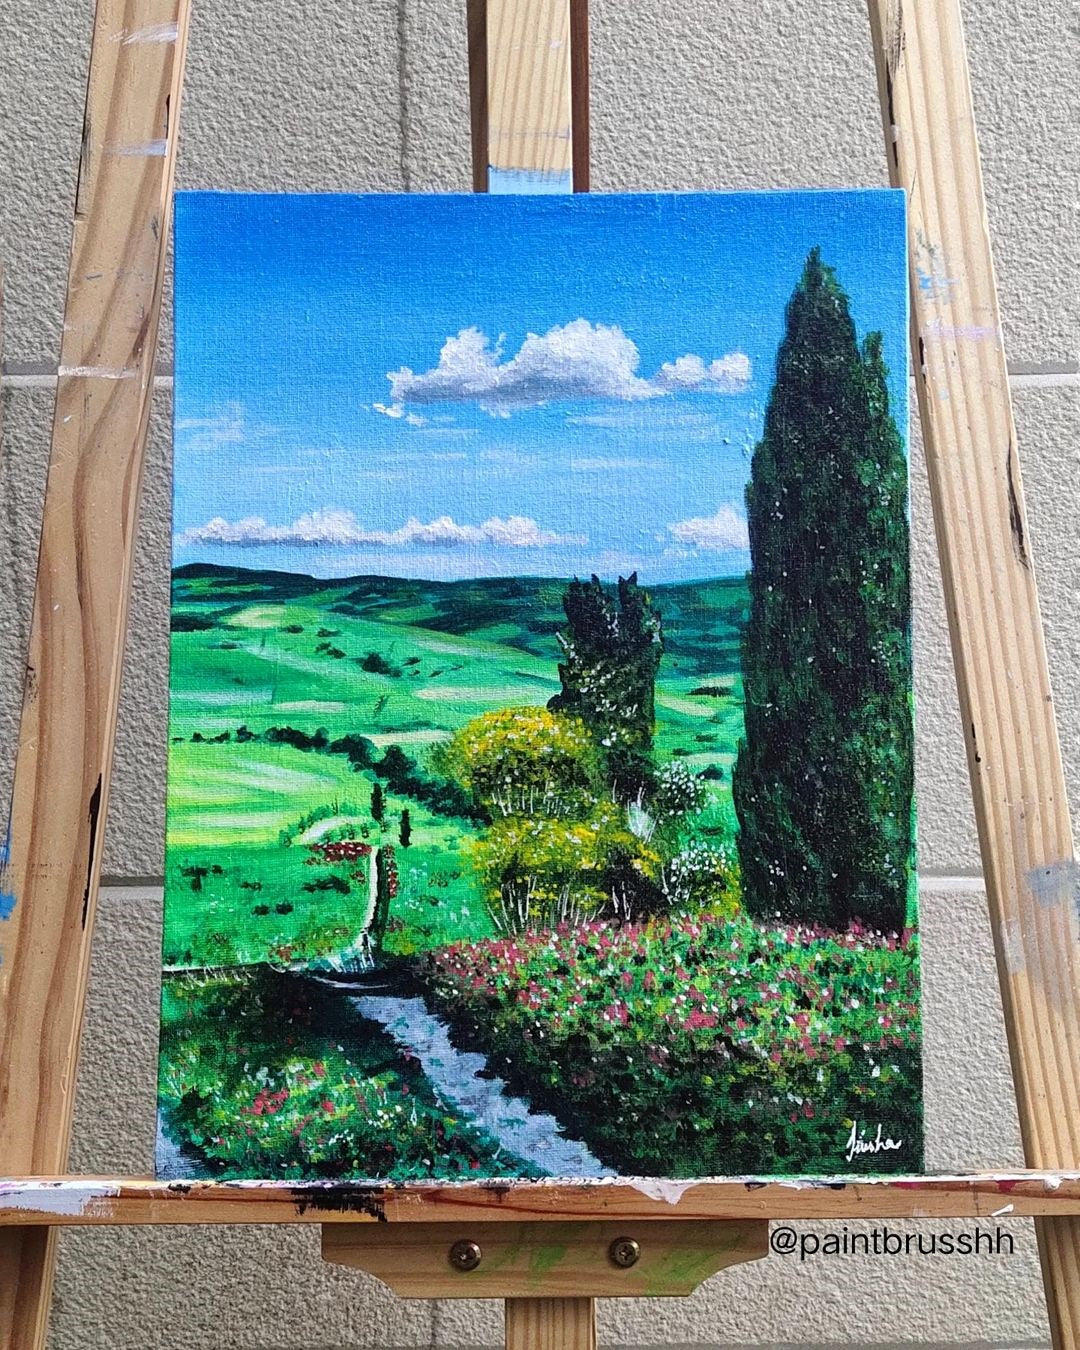 An easel with a vibrant rural landscape on the canvas.